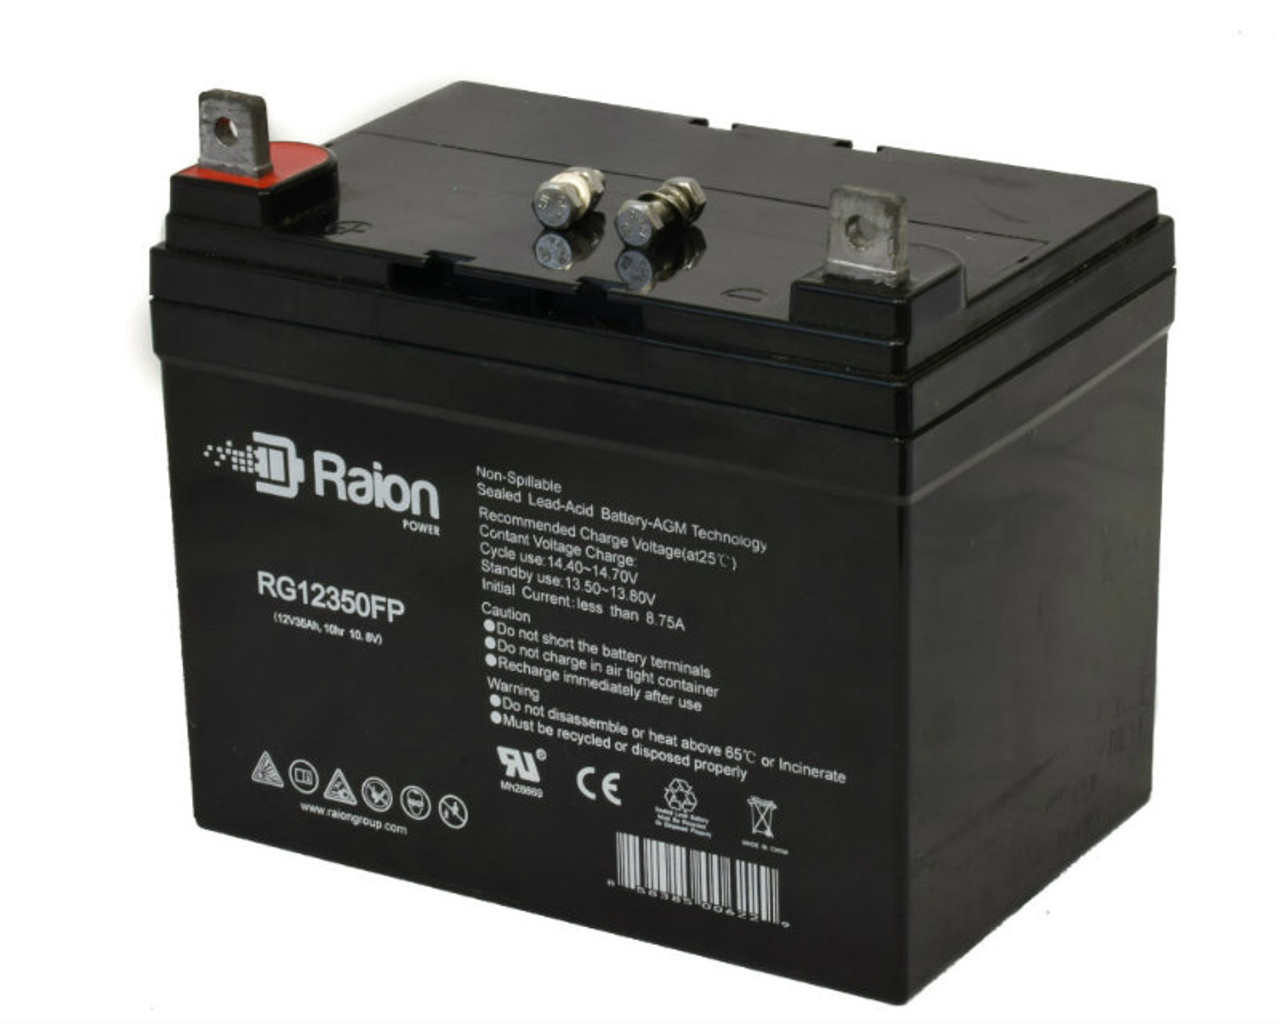 Raion Power Replacement 12V 35Ah RG12350FP Mobility Scooter Battery for Merits Health Products Travel-Ease Regal P3102S C MP3C